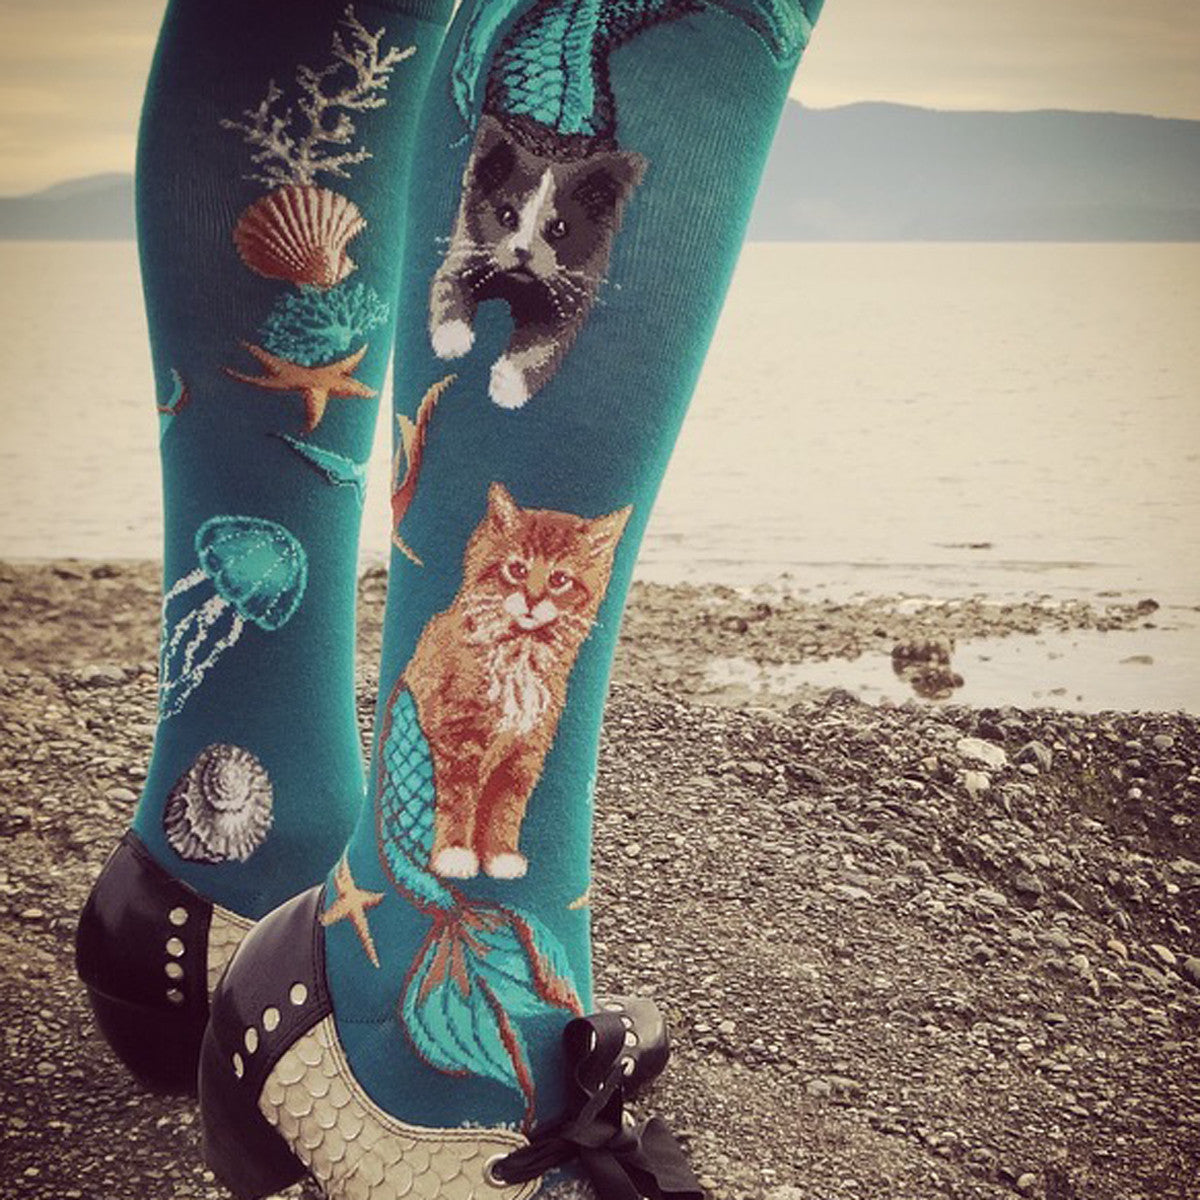 Purrmaids socks by ModSocks featuring cute mermaid cats and crazy catfish kittens.